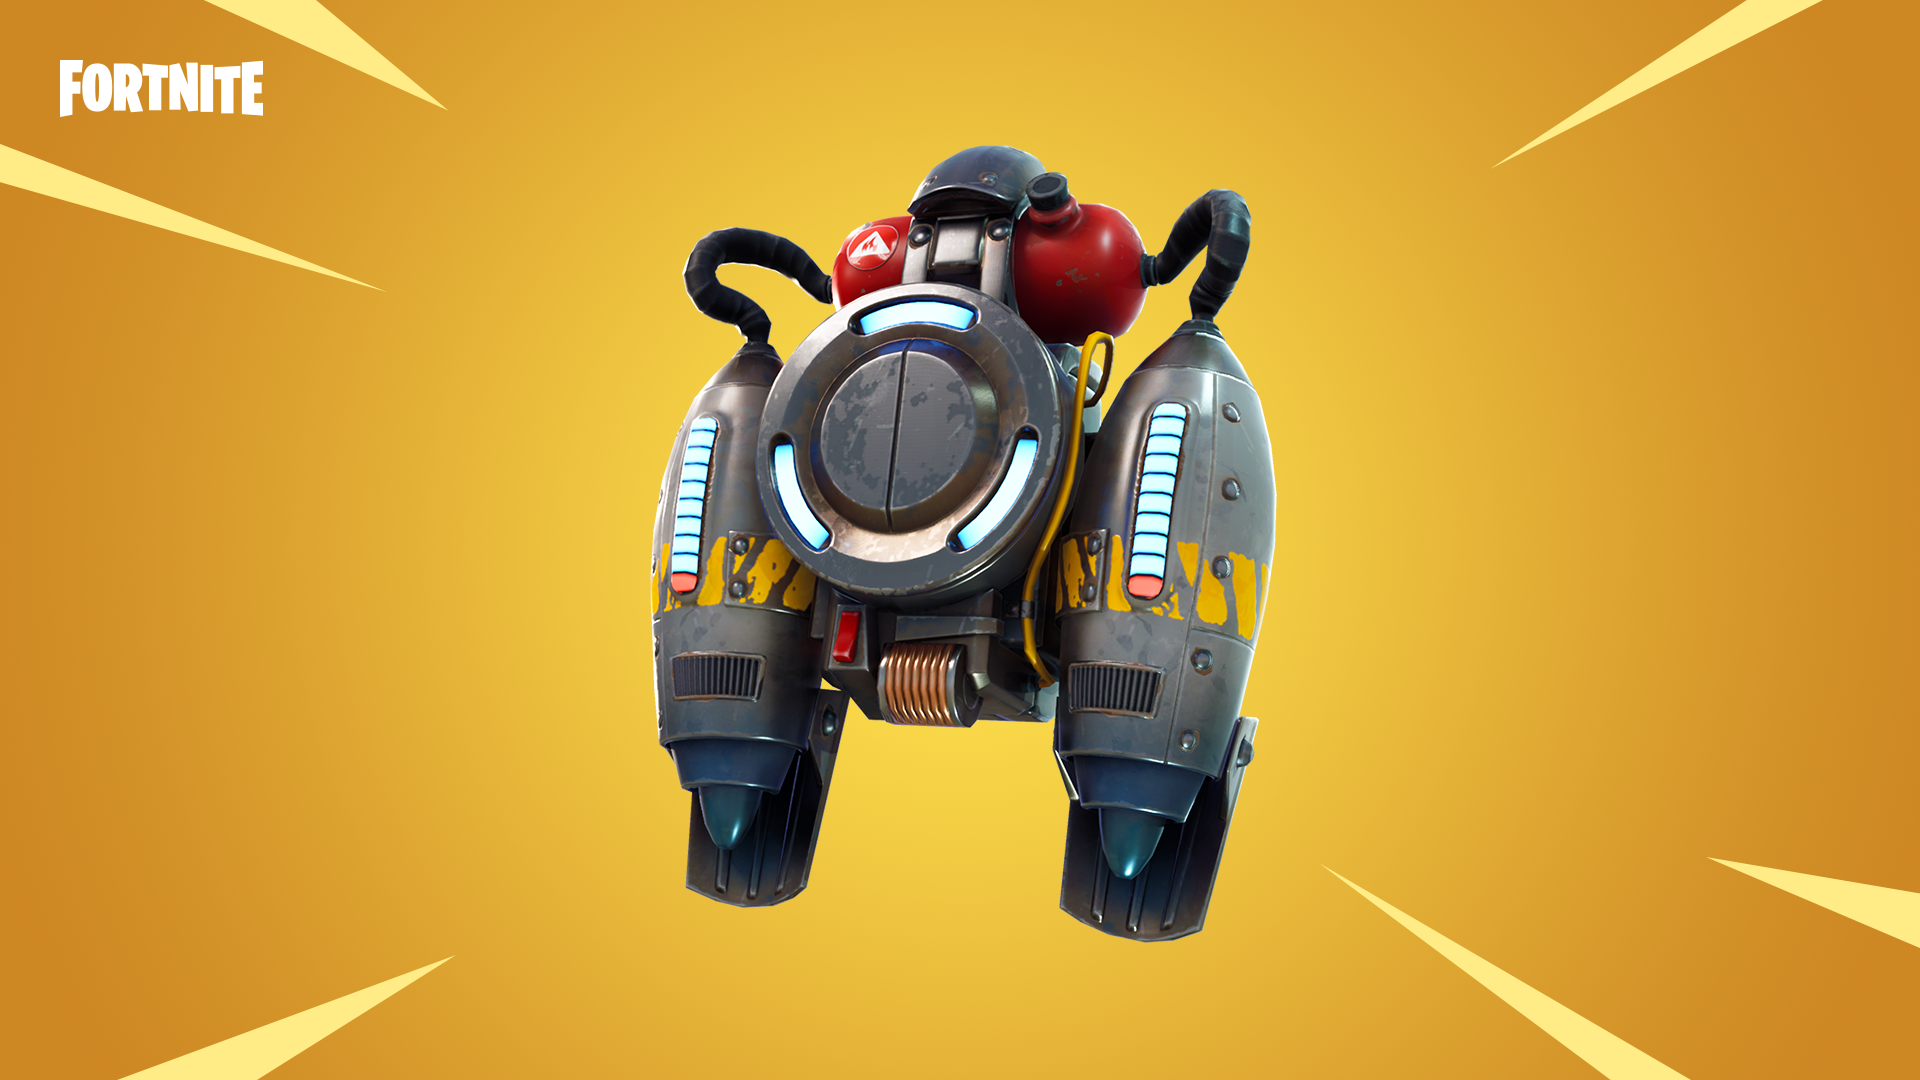 Fortnite2Fpatch notes2Fv4 2 contentupdate2Fheader v4 2 content update2FJetpack 1920x1080 20e524ca933c434a4c07719a5405e60041b47a1f